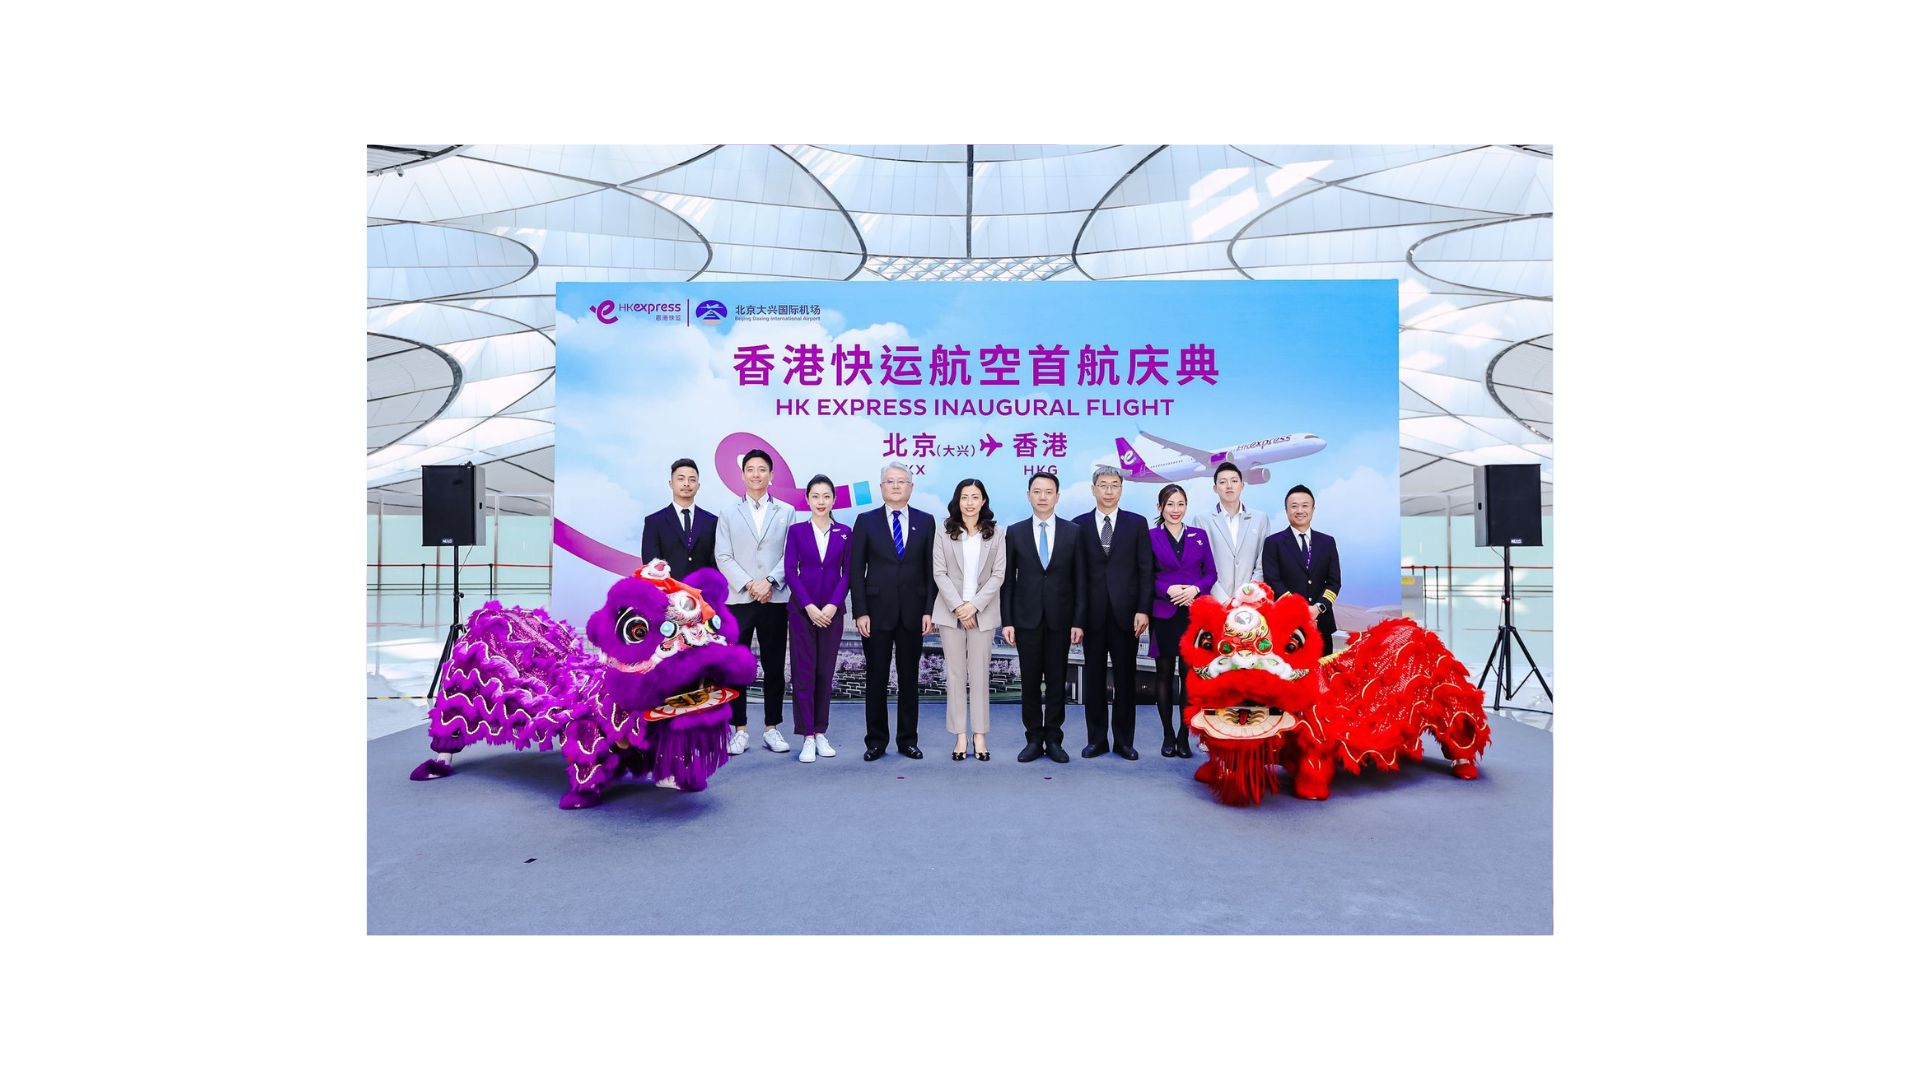 HK Express held a simple but grand inauguration ceremony at Beijing Daxing International Airport